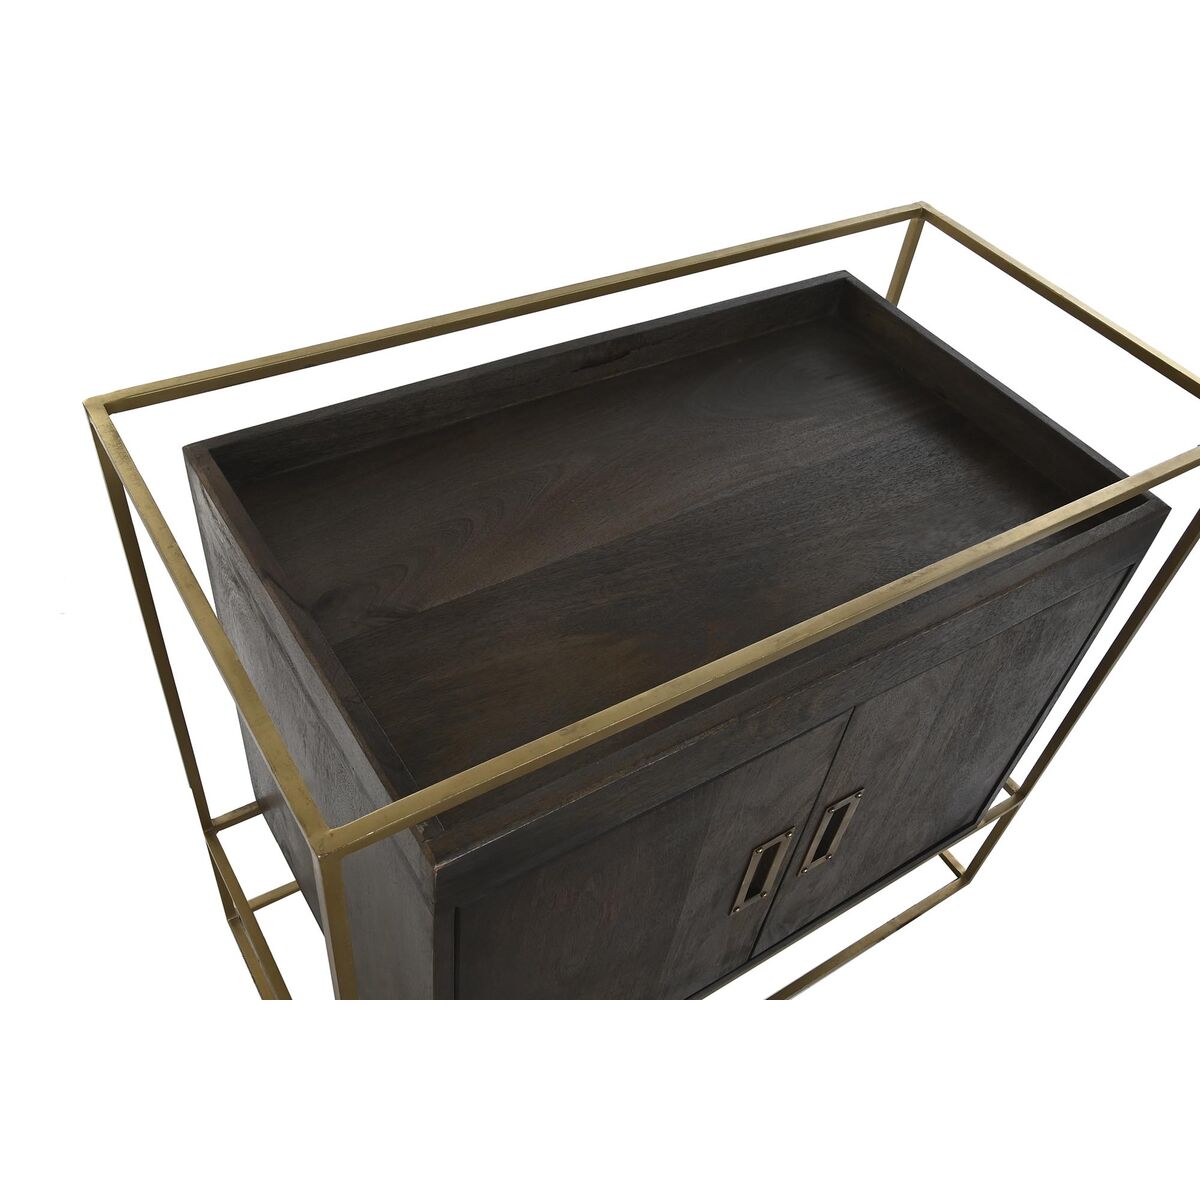 Hall Table in Mango Wood with Golden Structure (86 x 43 x 76 cm)